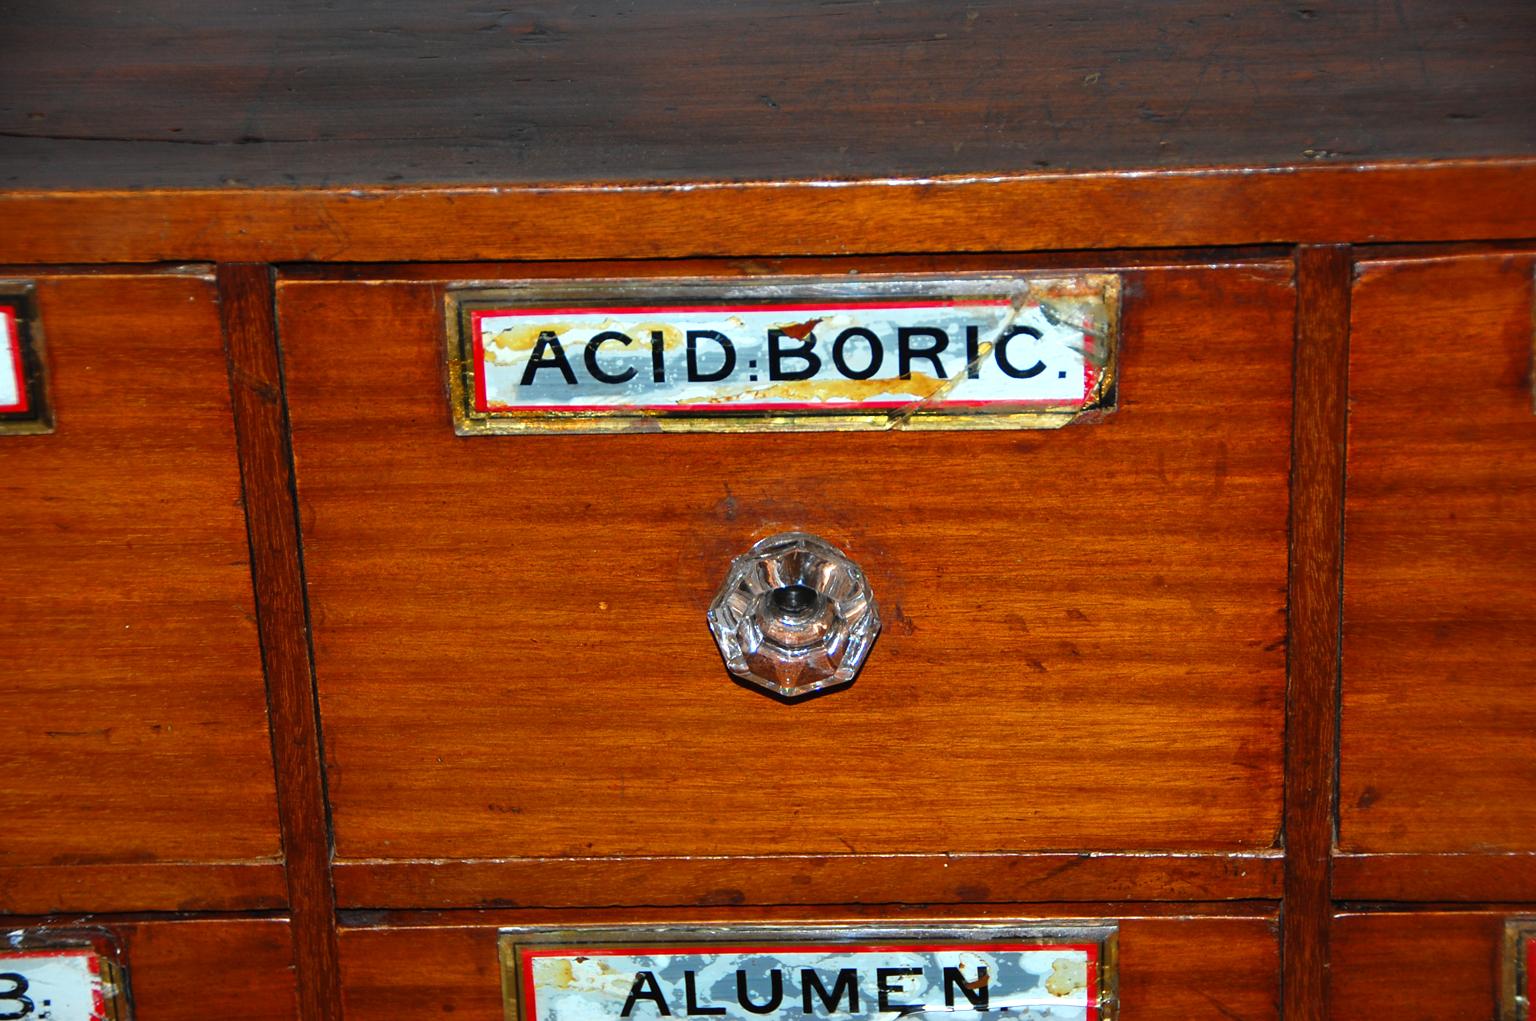 apothecary drawers